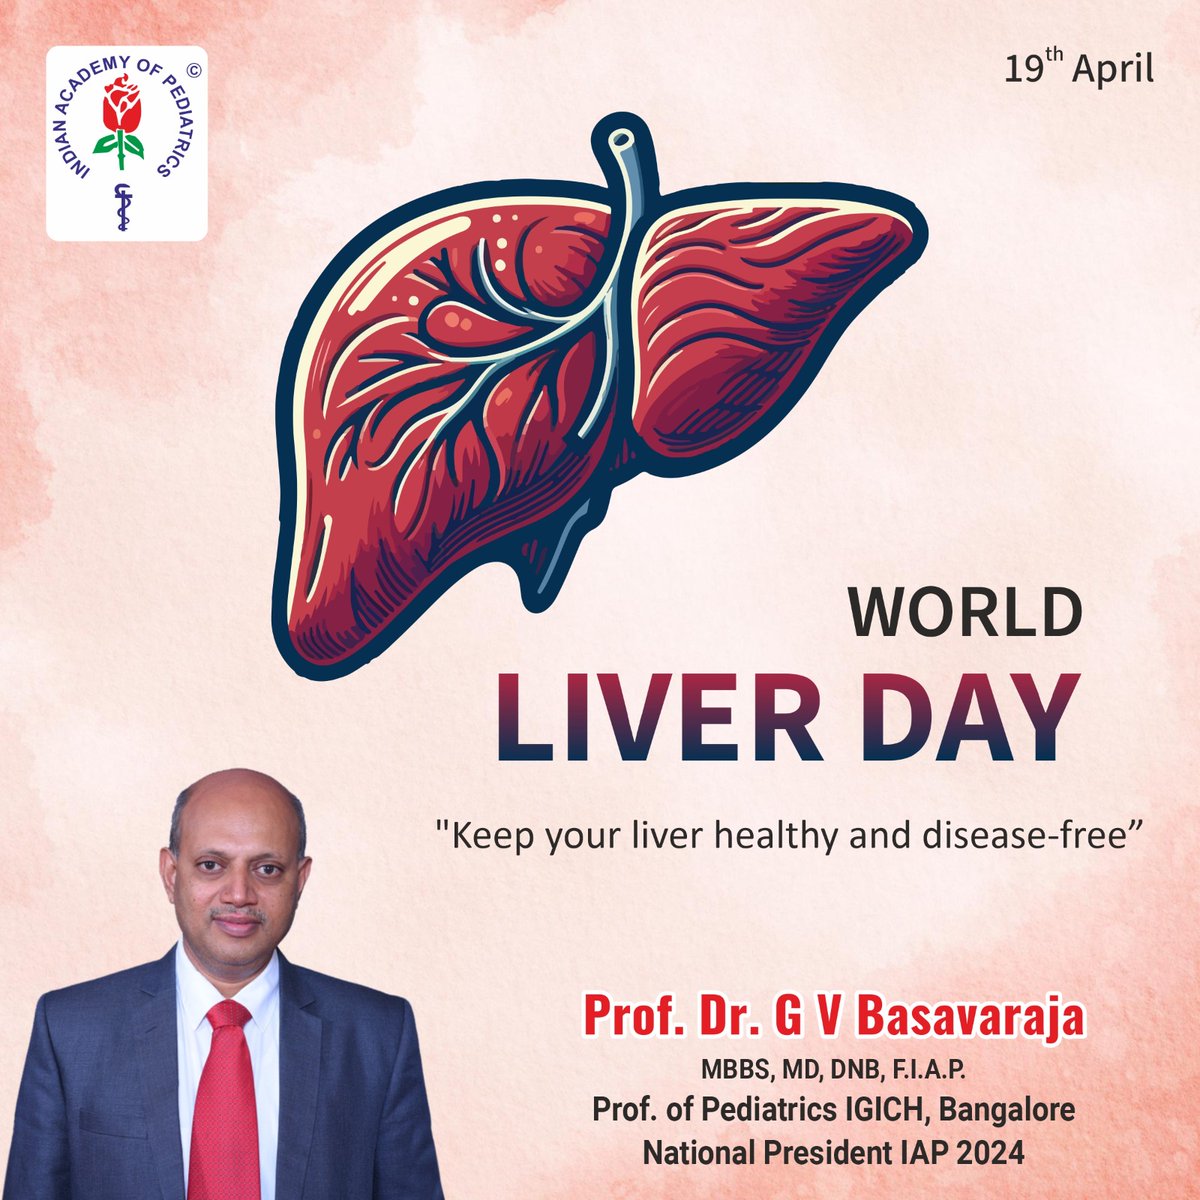 𝐇𝐚𝐩𝐩𝐲 𝐖𝐨𝐫𝐥𝐝 𝐋𝐢𝐯𝐞𝐫 𝐃𝐚𝐲! 🩺

Your liver works hard every day to keep you healthy - so it's crucial to take care of it.

#GVB #WorldLiverDay #liverhealth #healthyliver #LiverAwareness #PreventLiverDisease #livercare #healthylifestyle #healthiswealth #stayhealthy